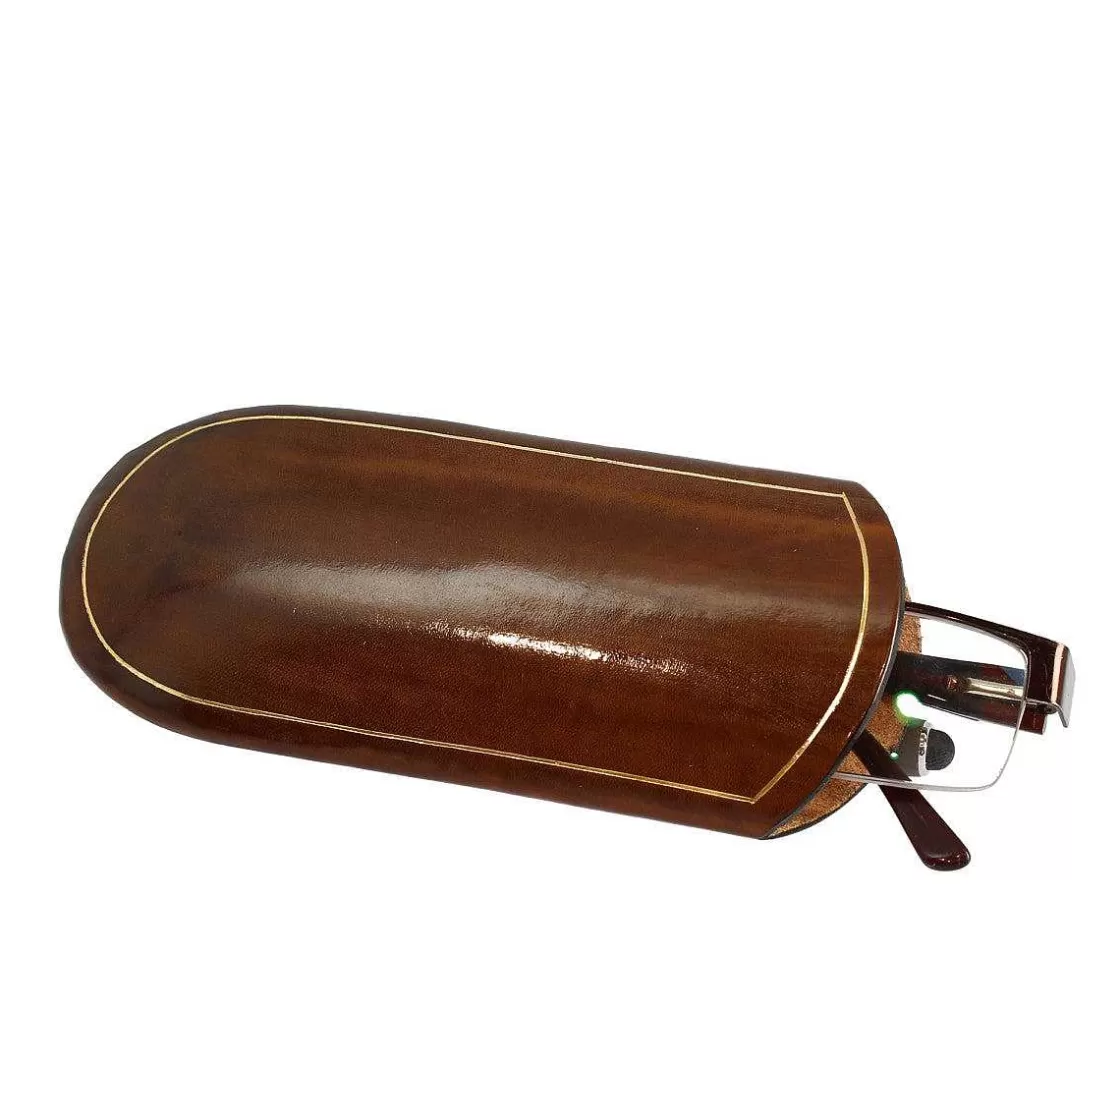 Leonardo Medium Pocket Glasses Case Made Of Leather Available In Various Colors Best